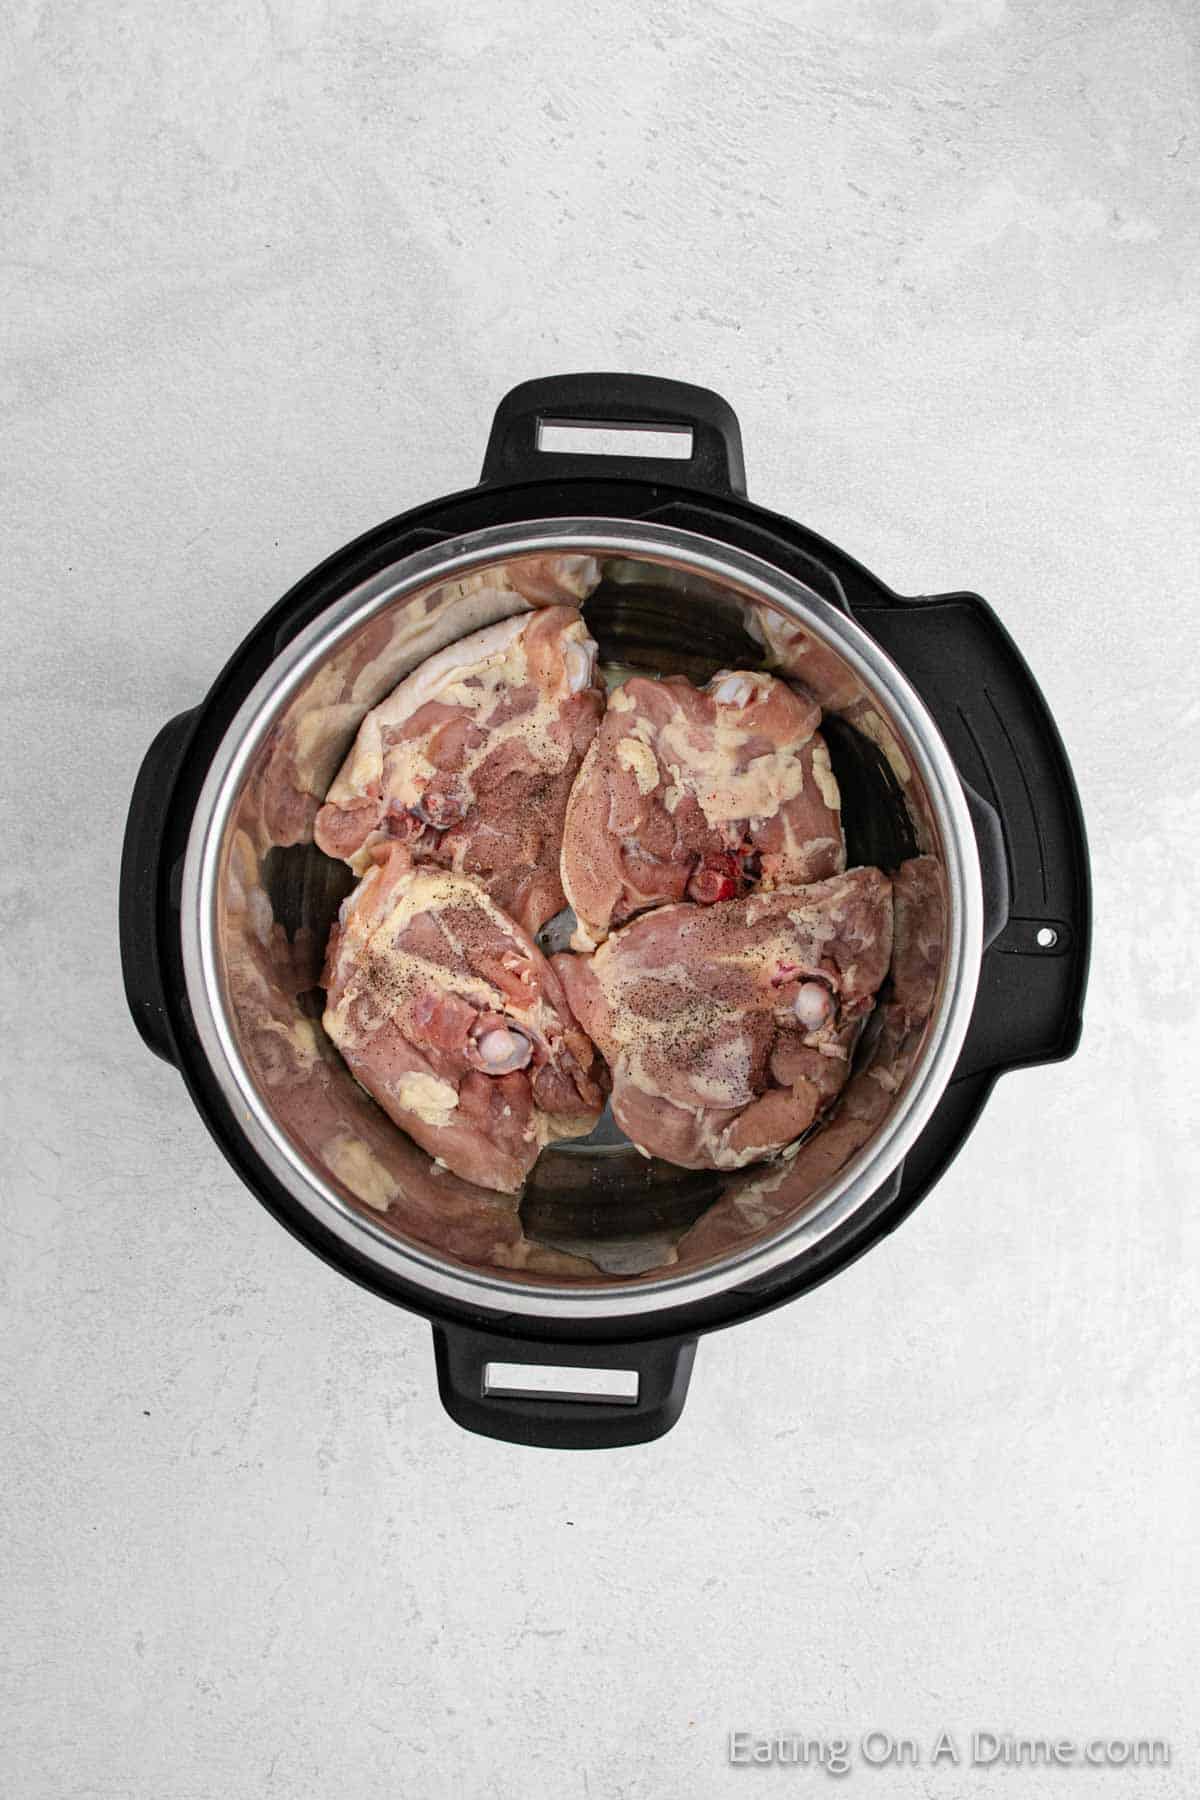 Placing chicken thighs in the instant pot